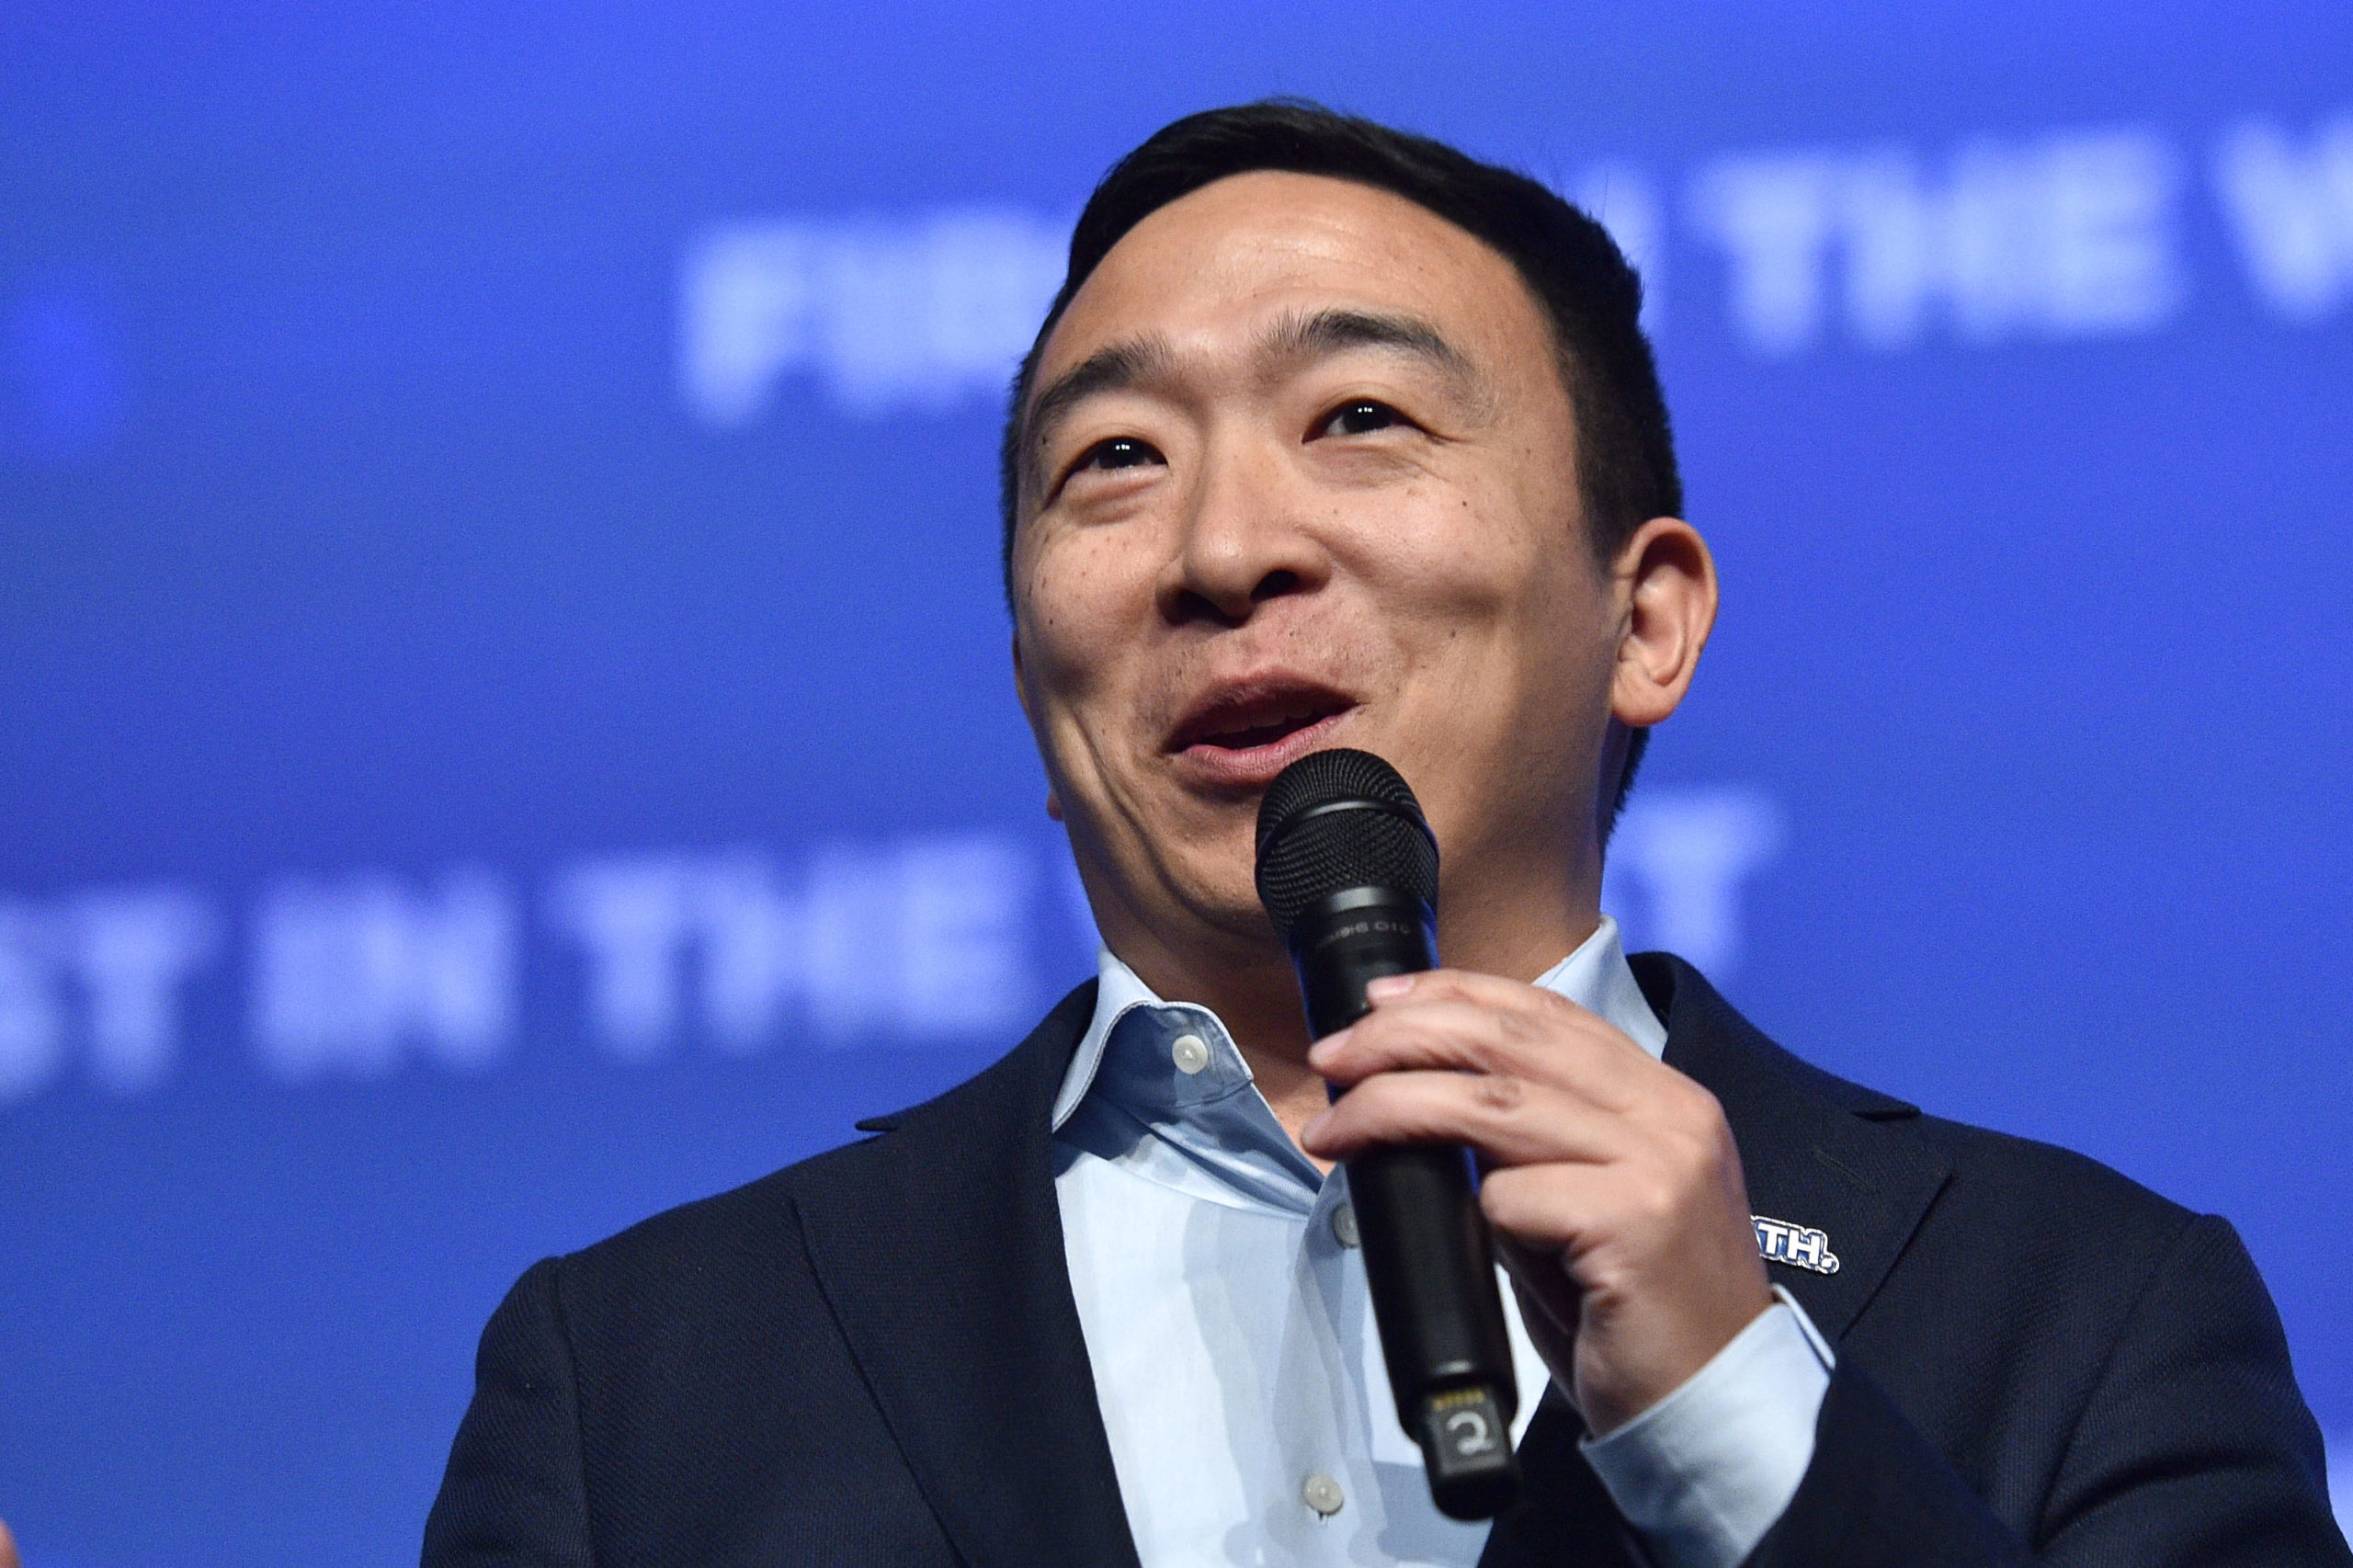 Andrew Yang joins CNN as political commentator